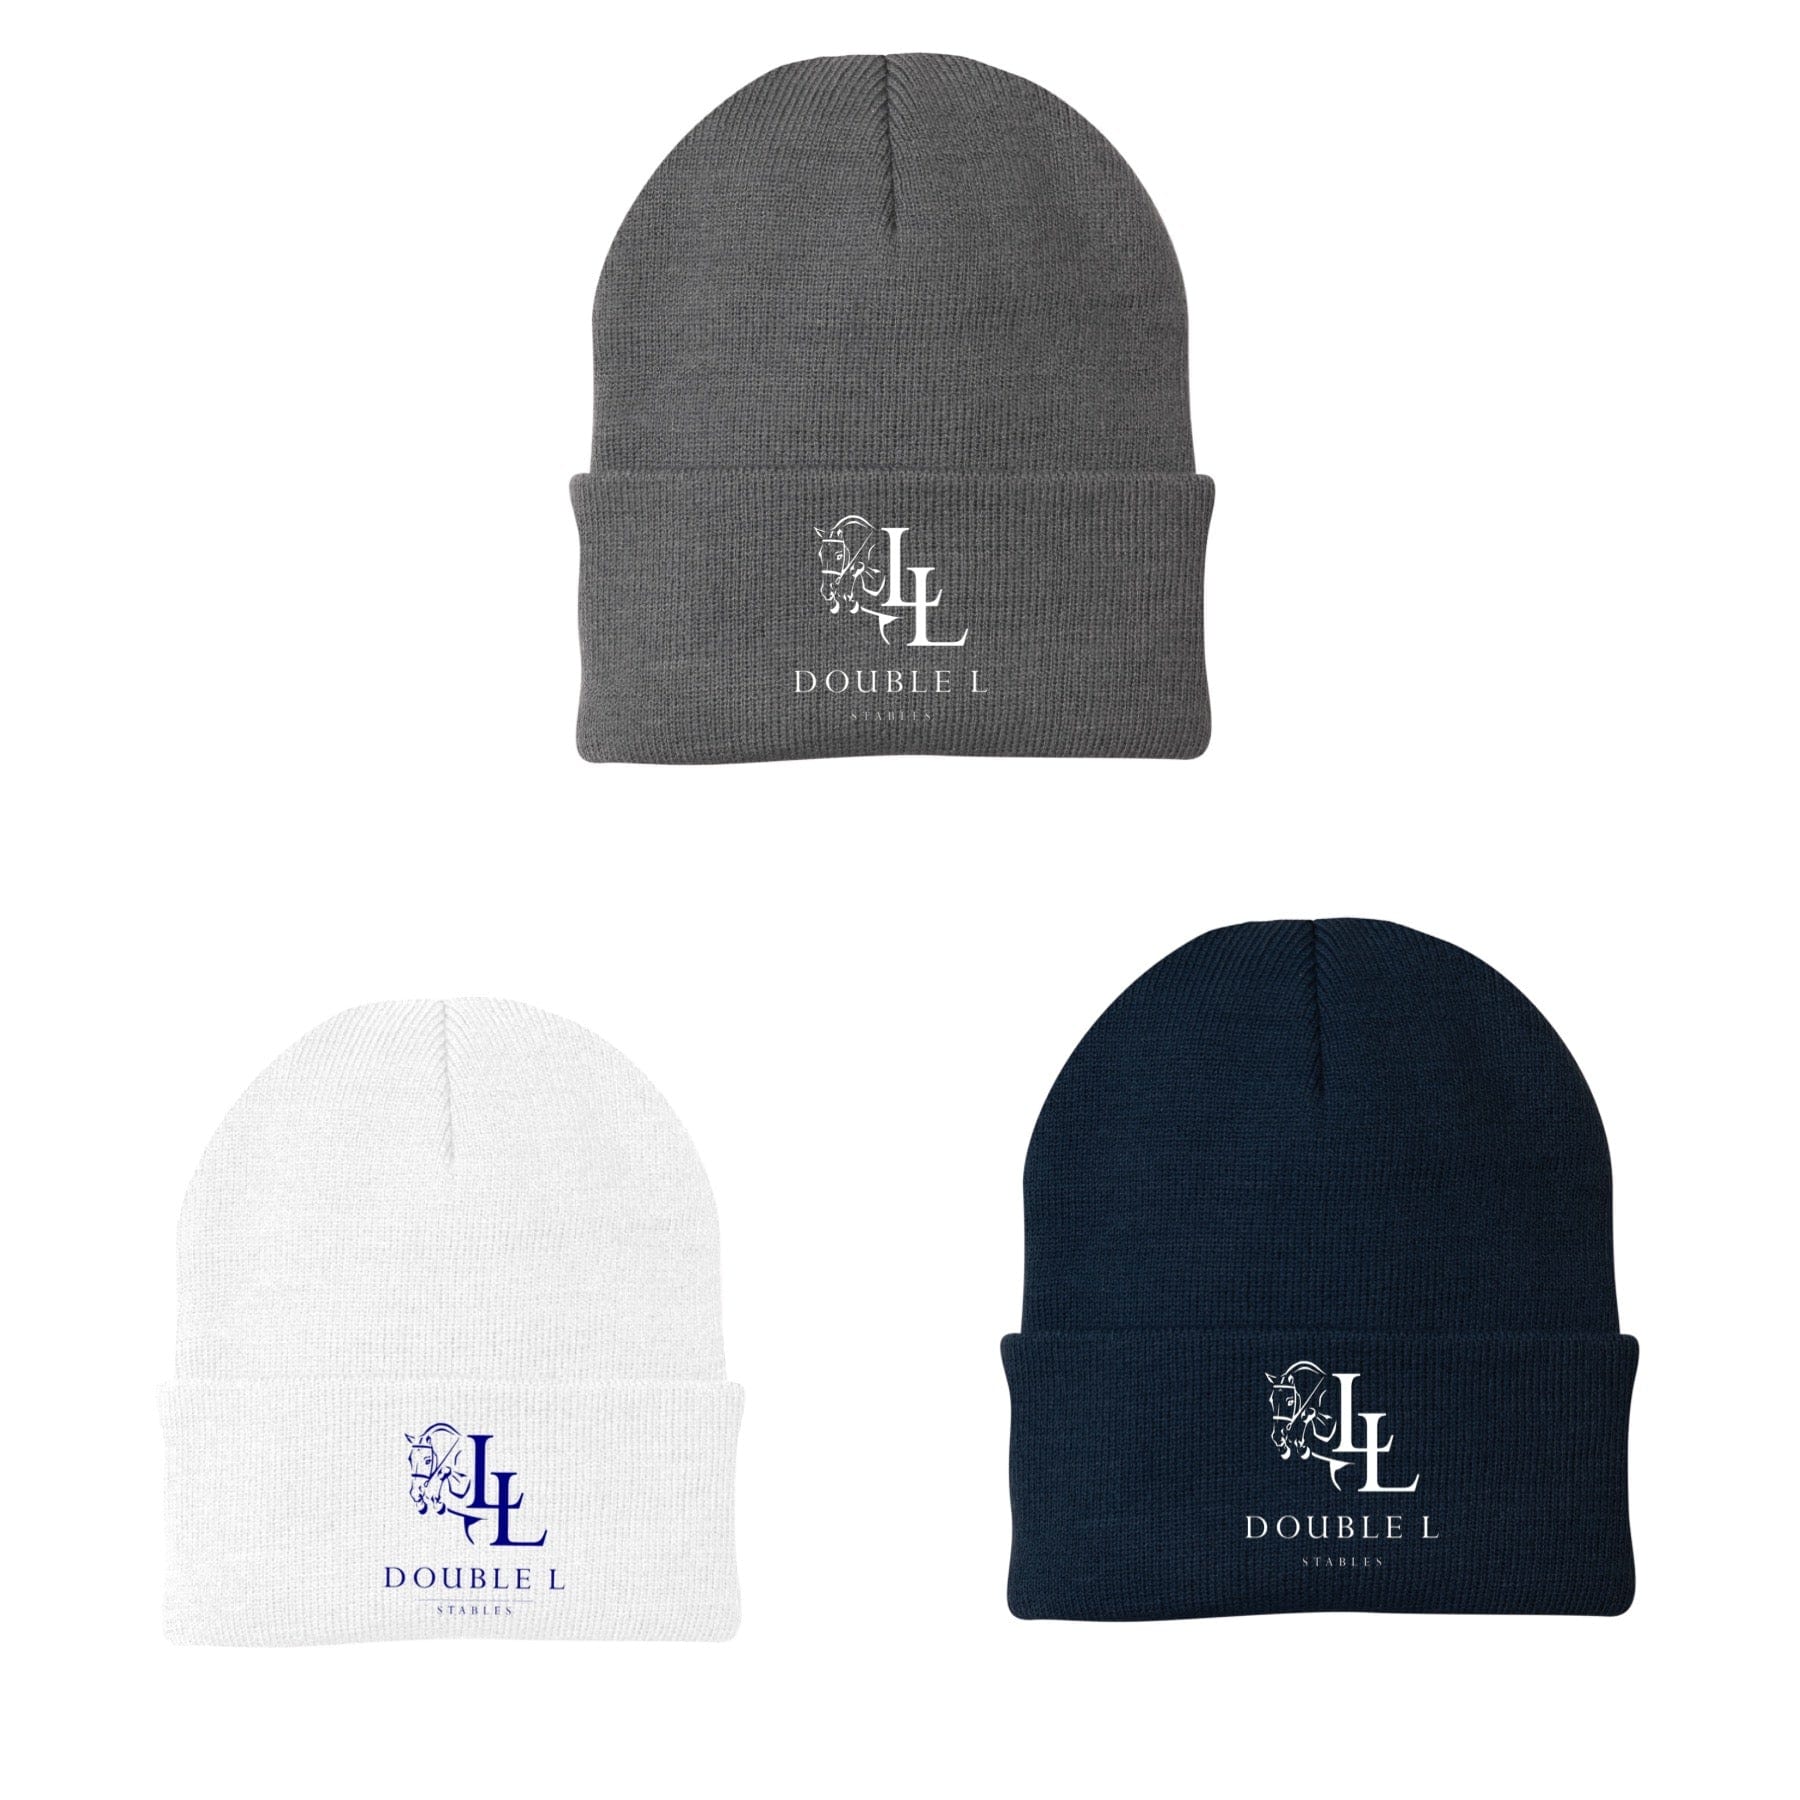 Equestrian Team Apparel Double L Stables Beanie equestrian team apparel online tack store mobile tack store custom farm apparel custom show stable clothing equestrian lifestyle horse show clothing riding clothes horses equestrian tack store